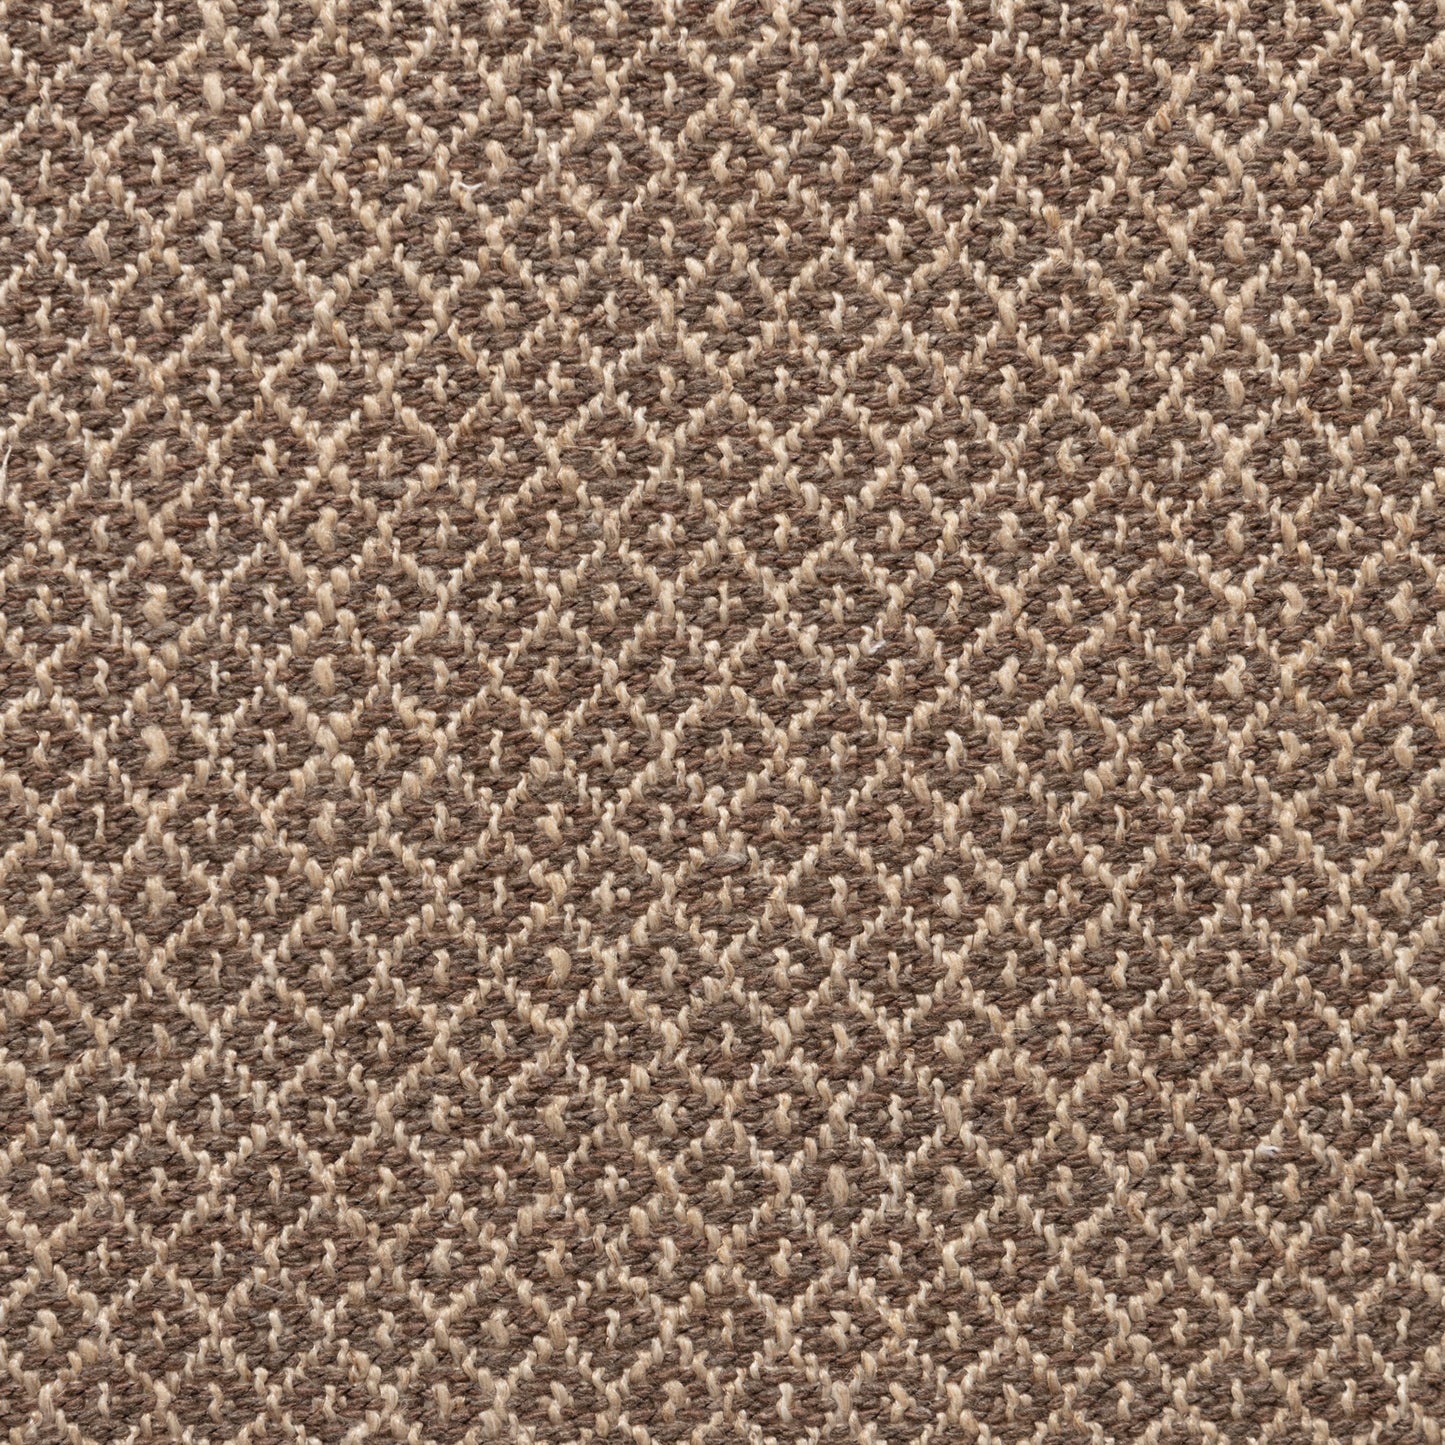 #173 BROWN AND BEIGE DIAMOND